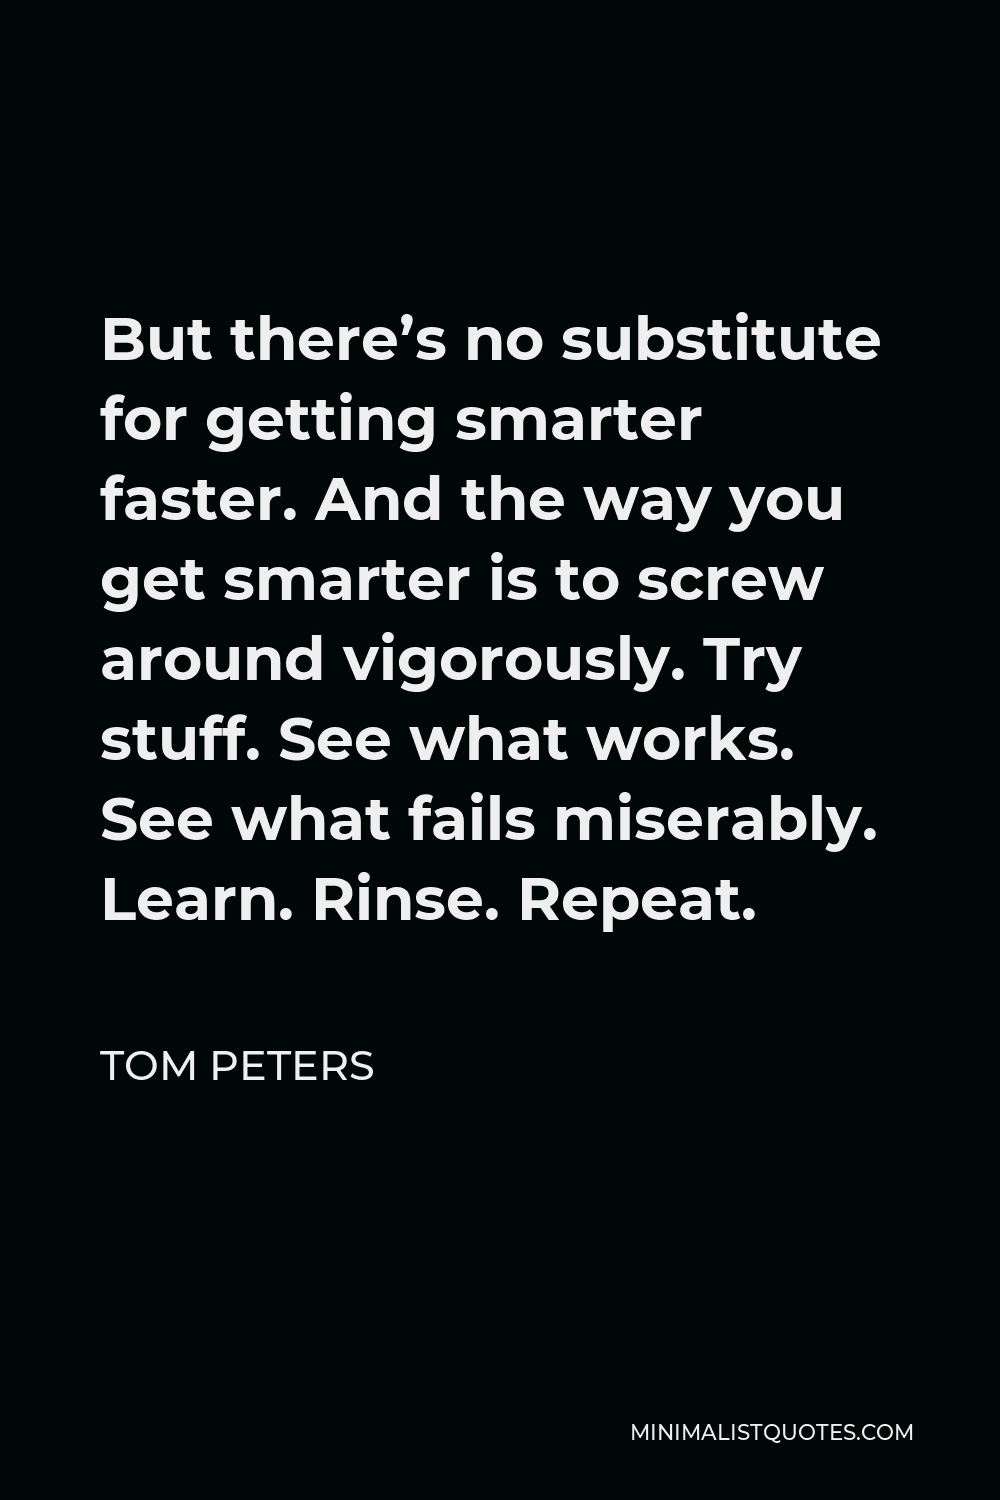 Tom Peters Quote - But there’s no substitute for getting smarter faster. And the way you get smarter is to screw around vigorously. Try stuff. See what works. See what fails miserably. Learn. Rinse. Repeat.